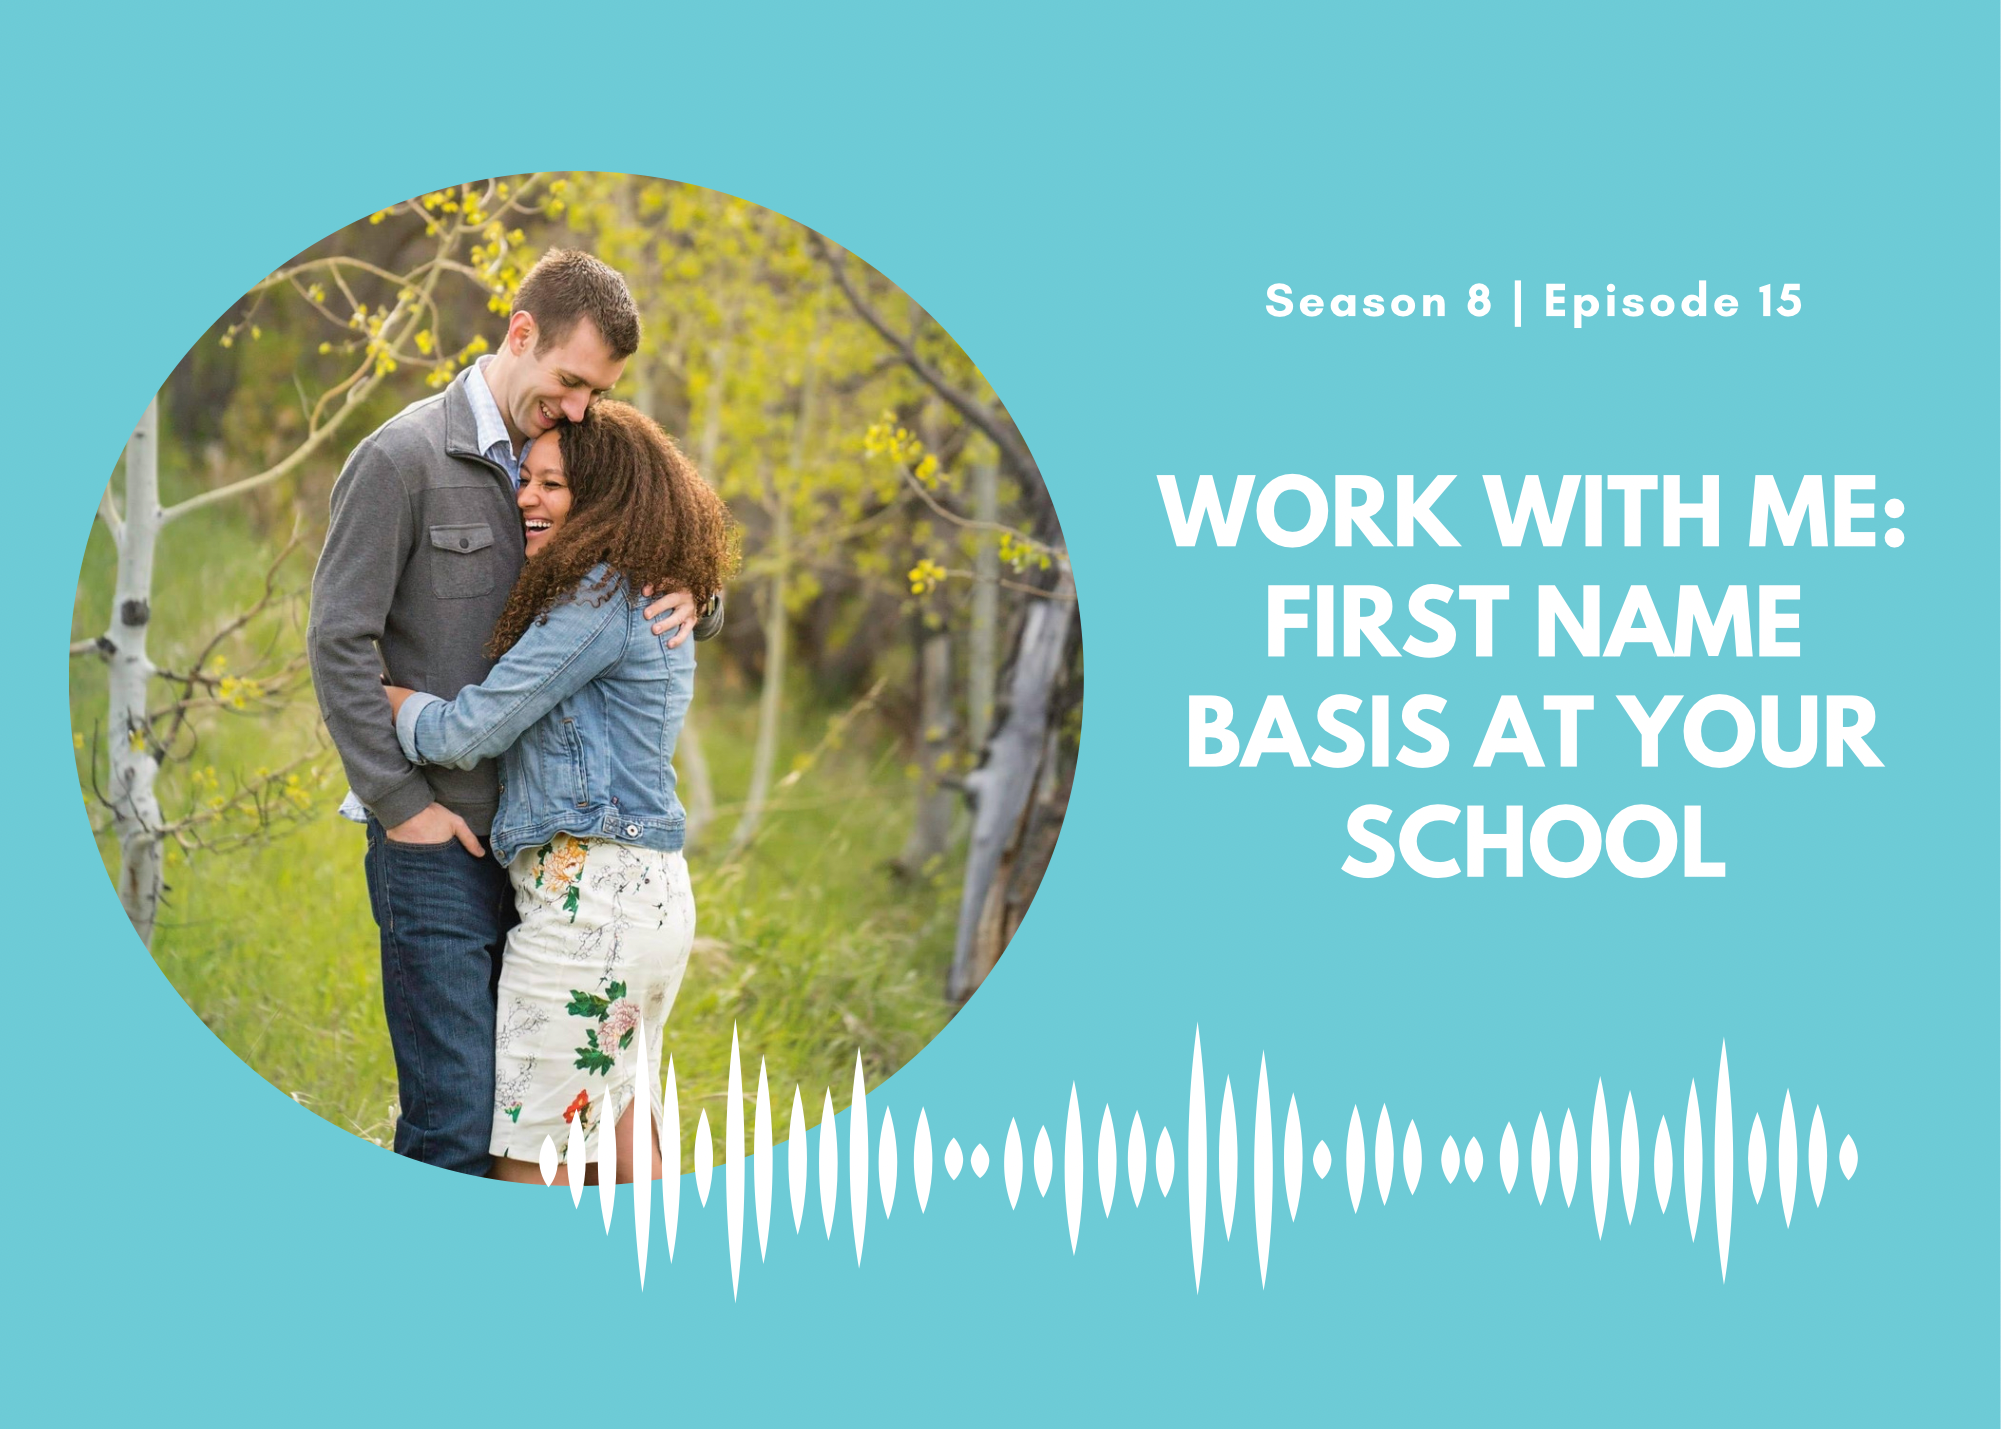 Work With Me: First Name Basis at Your School